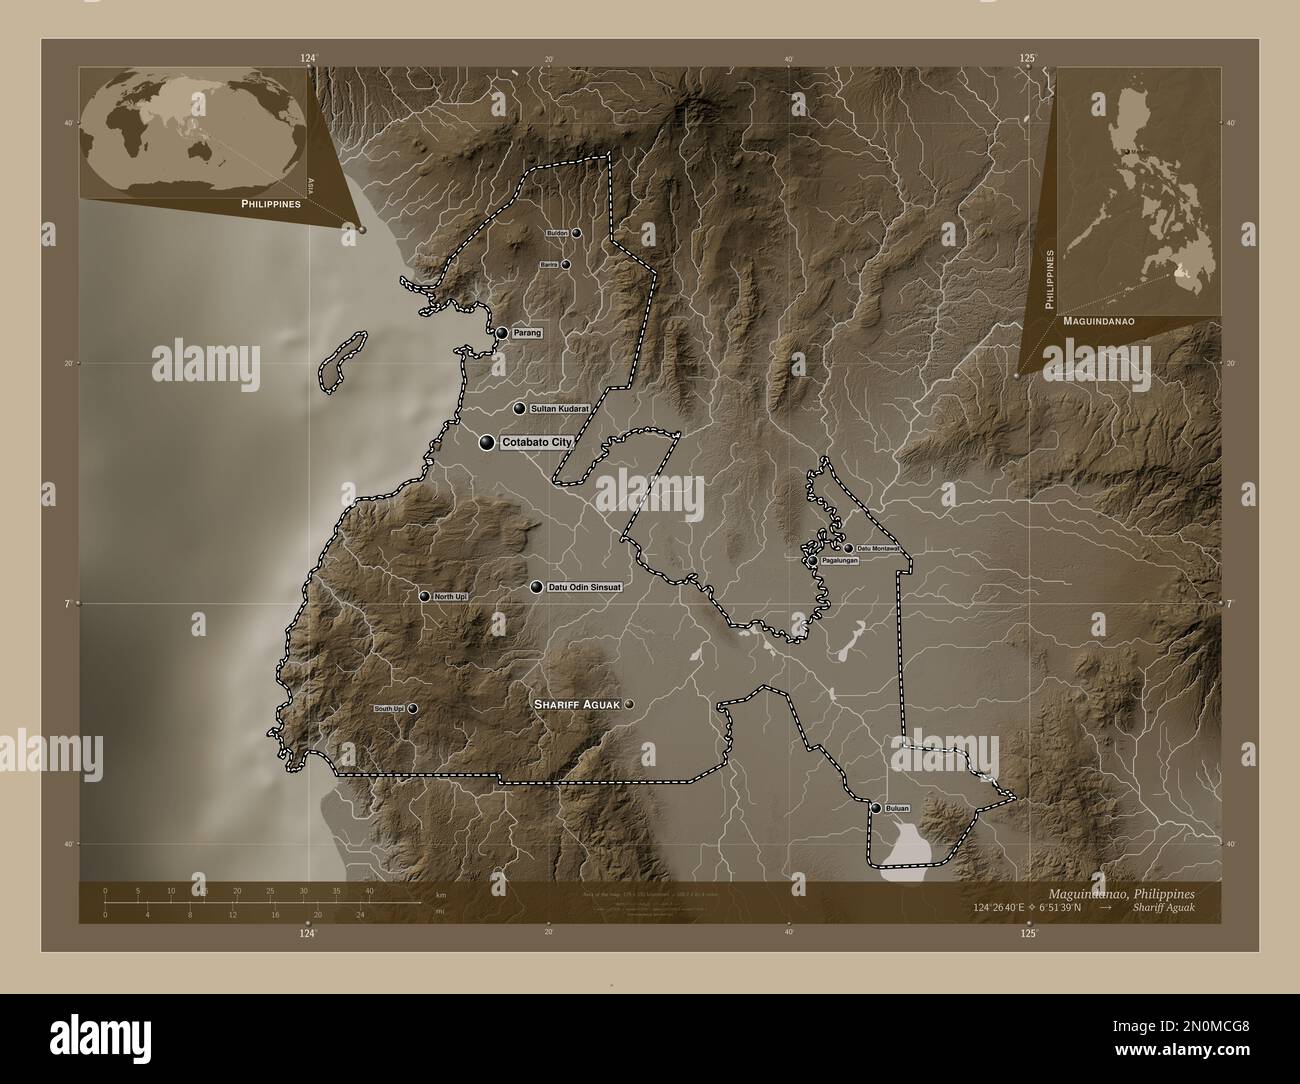 Maguindanao, province of Philippines. Elevation map colored in sepia tones with lakes and rivers. Locations and names of major cities of the region. C Stock Photo